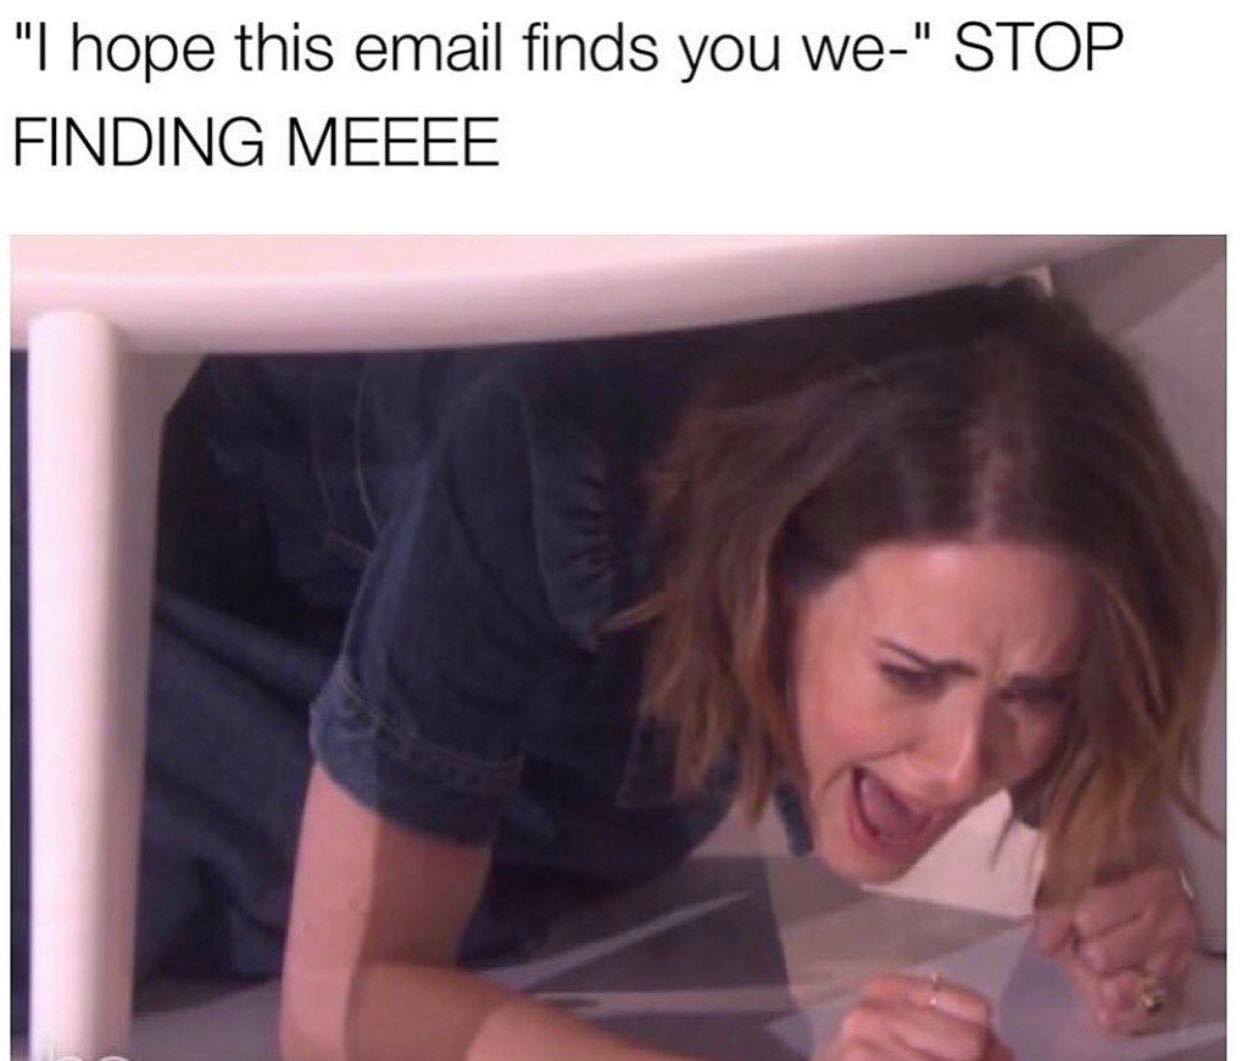 photo caption - "I hope this email finds you we" Stop Finding Meeee w